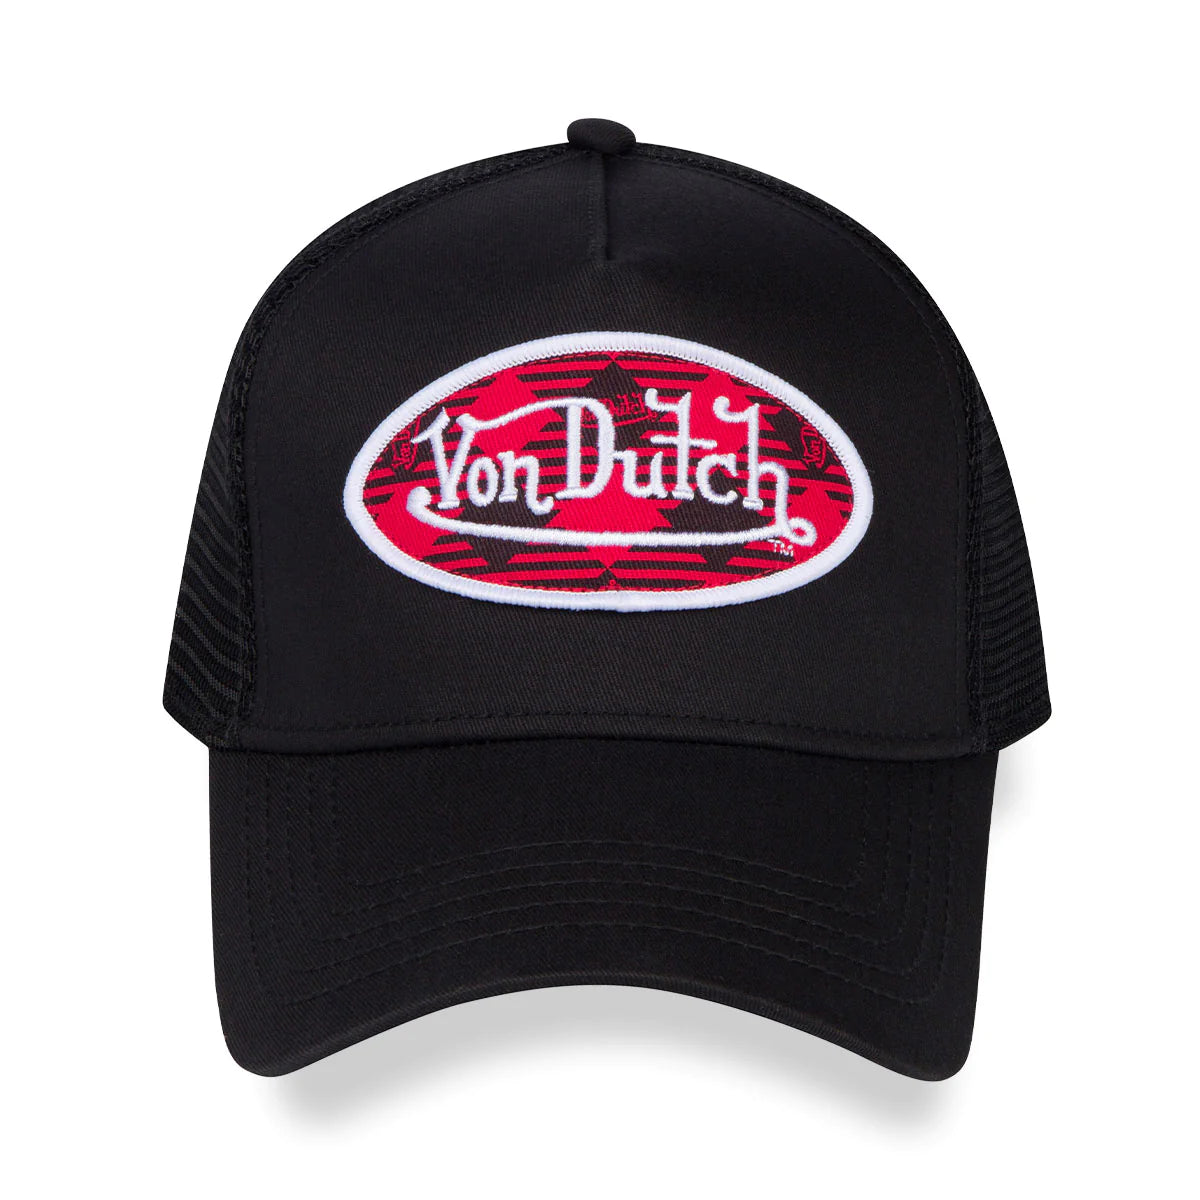 Classic black Snapback Trucker Hat by Von Dutch features a Red and Black Plaid iconic logo patch on front